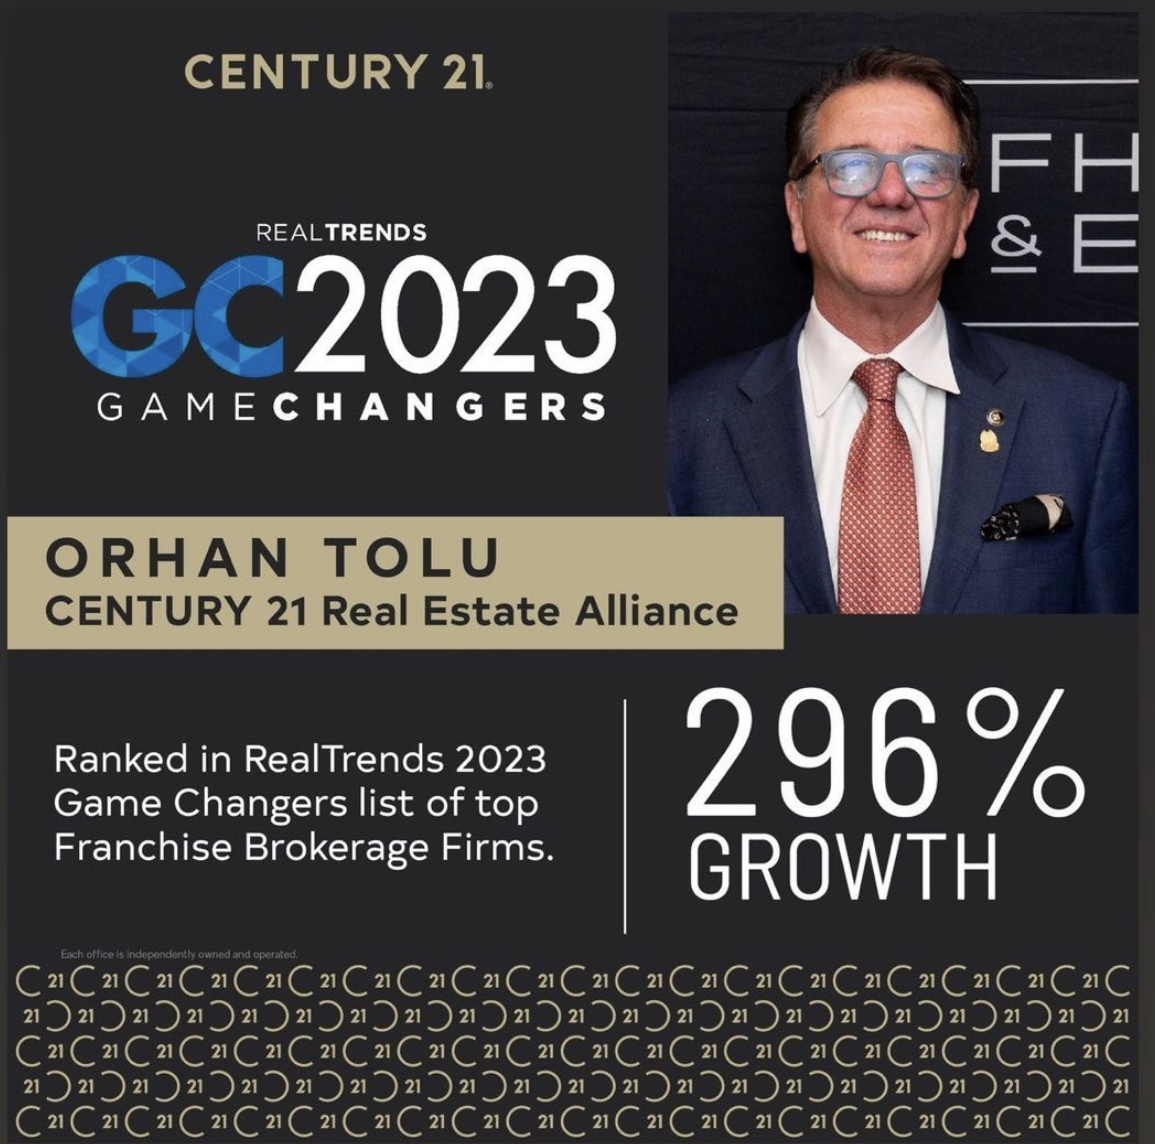 Century 21 Real estate alliance named: 2023 real trends game changer